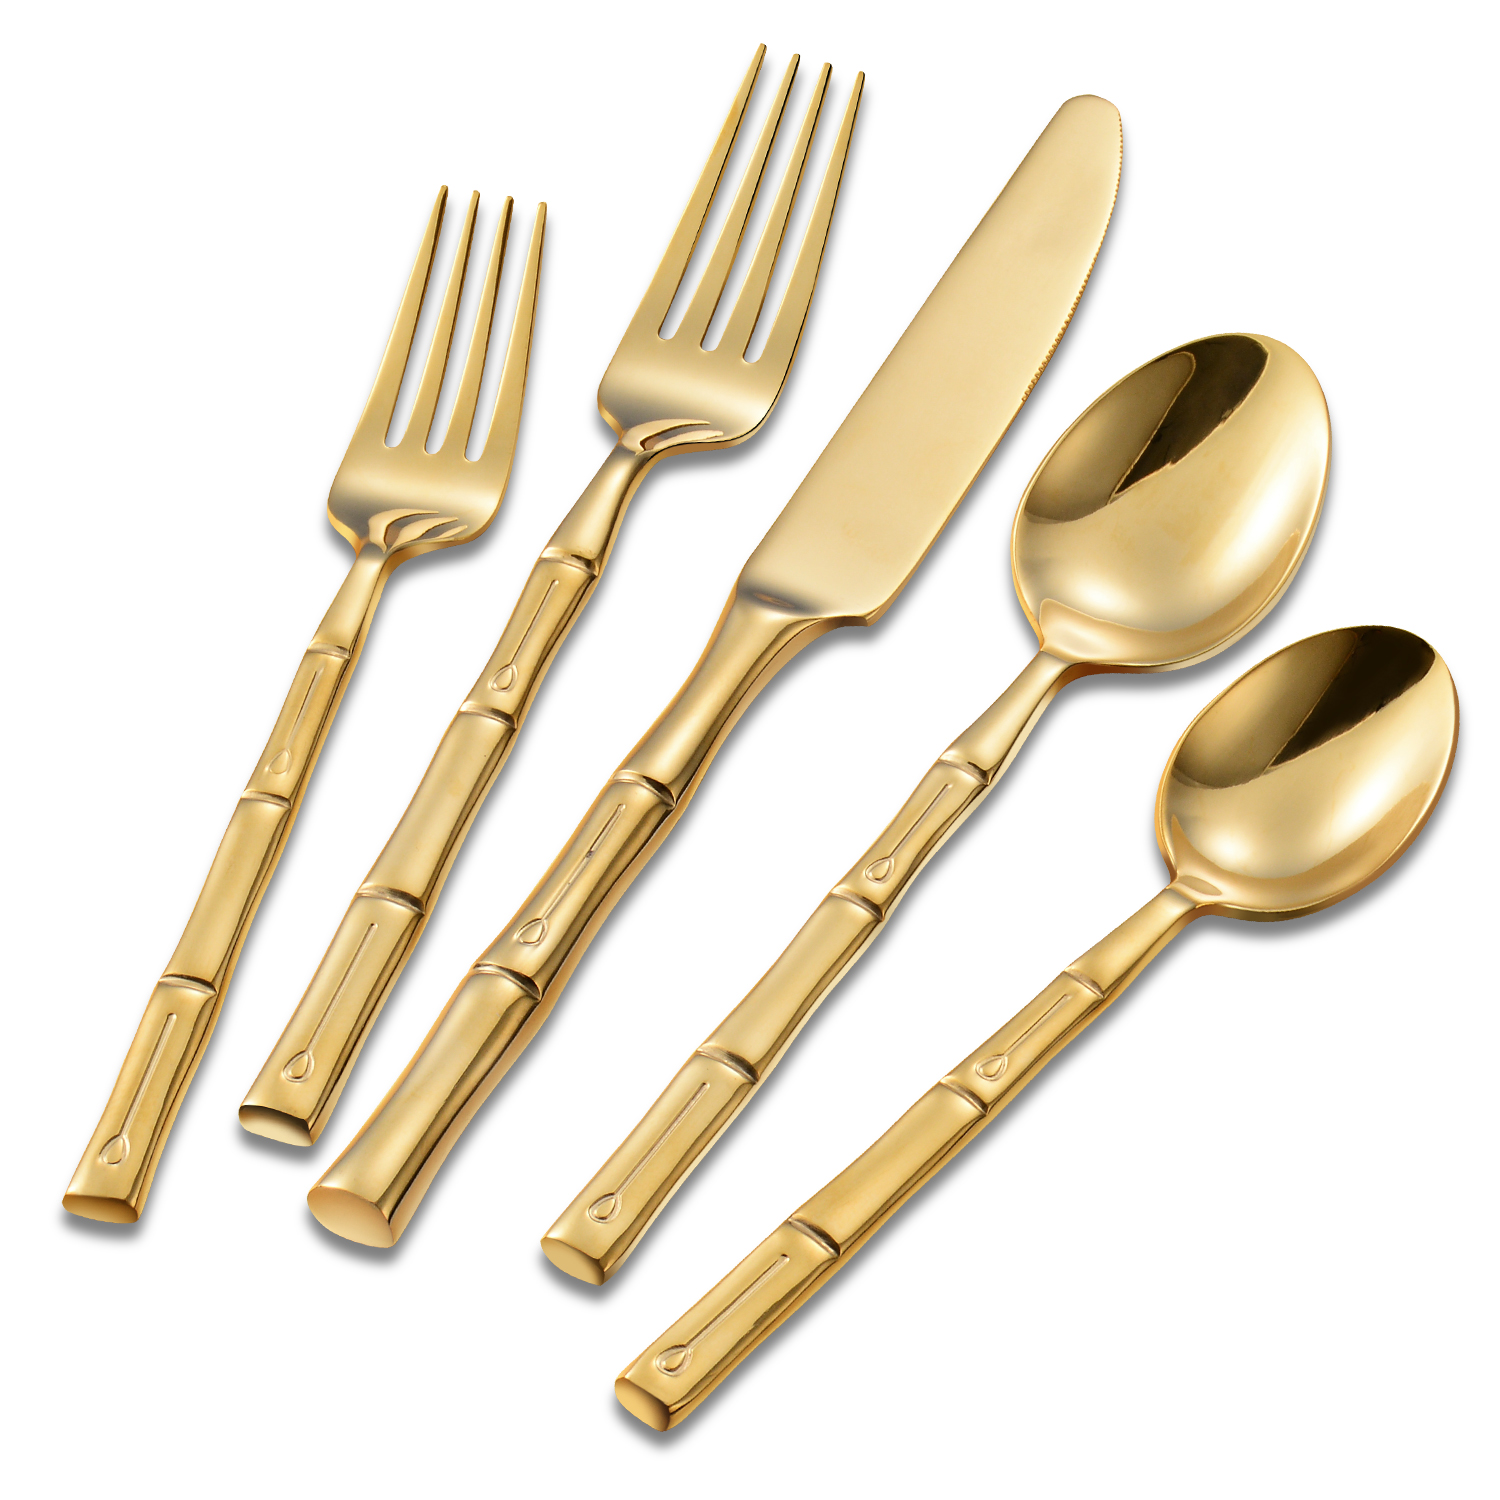 Manufacturer of Modern Black Flatware - Gold Bamboo Shaped Handle Stainless Steel Cutlery Set – Liou